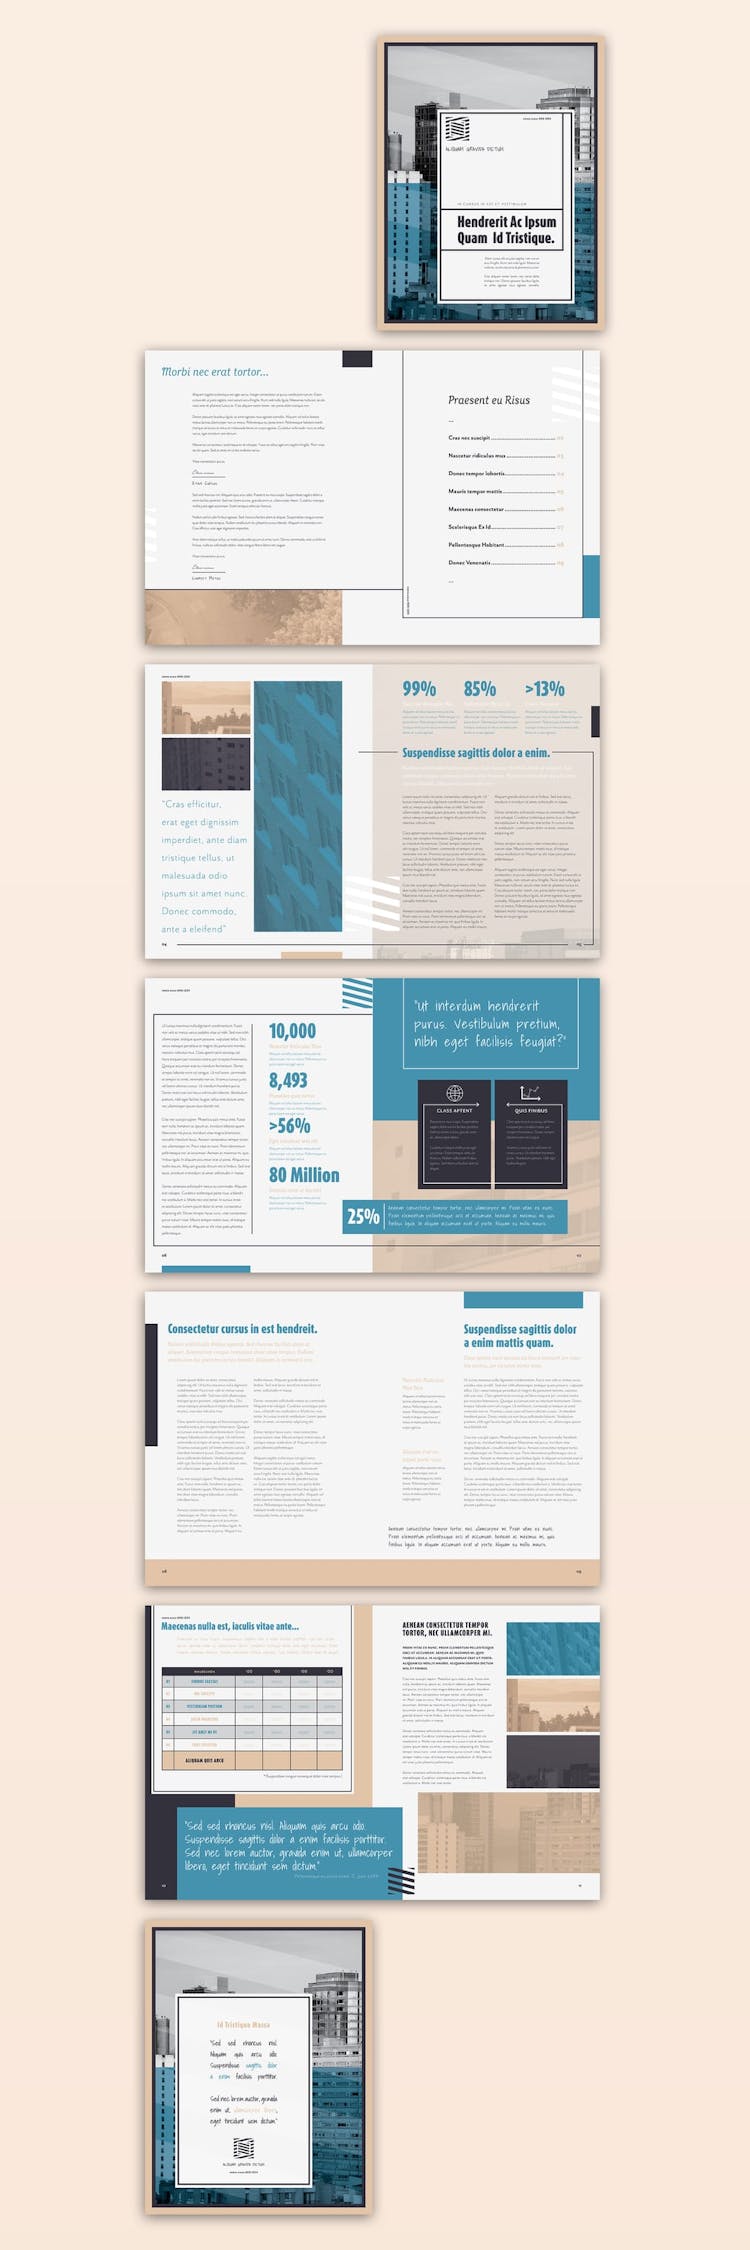 22 Fresh InDesign Brochure Templates – Redokun With Regard To Brochure Templates Free Download Indesign